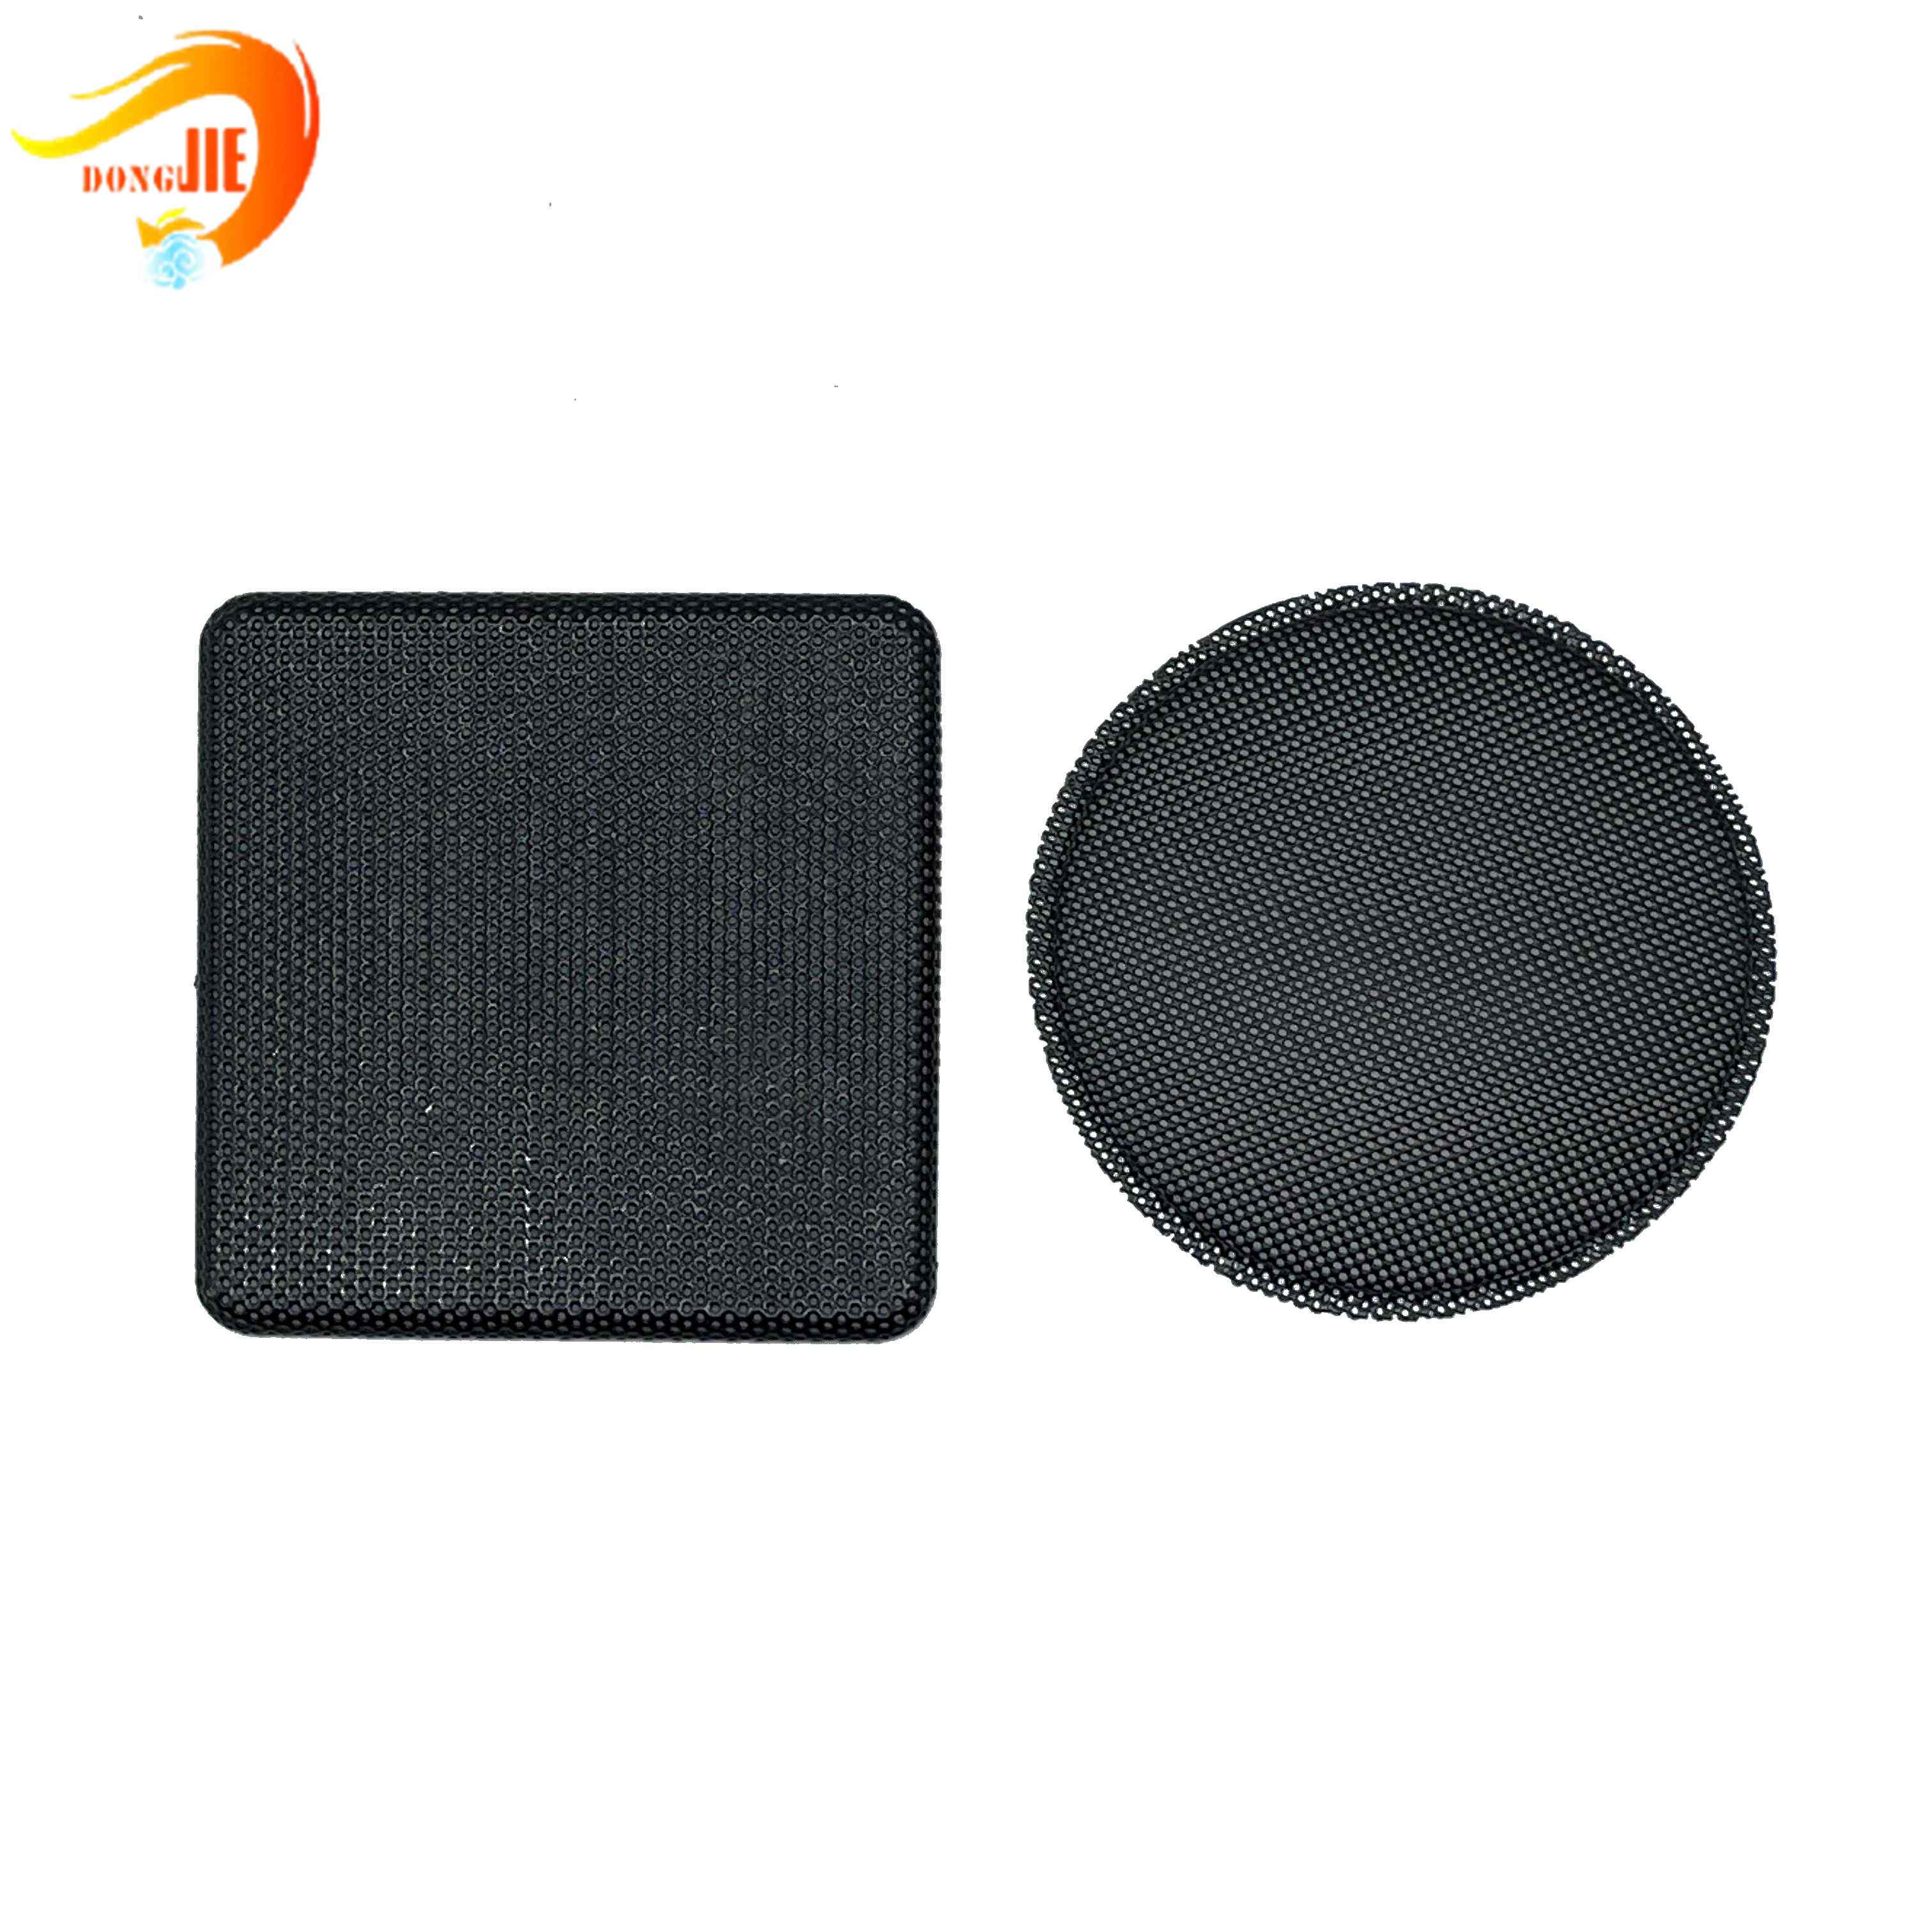 2019 Good Quality Perforated Sheet - Decorative Soundproofing Cover Acoustic Panels Perforated Metal Mesh – Dongjie